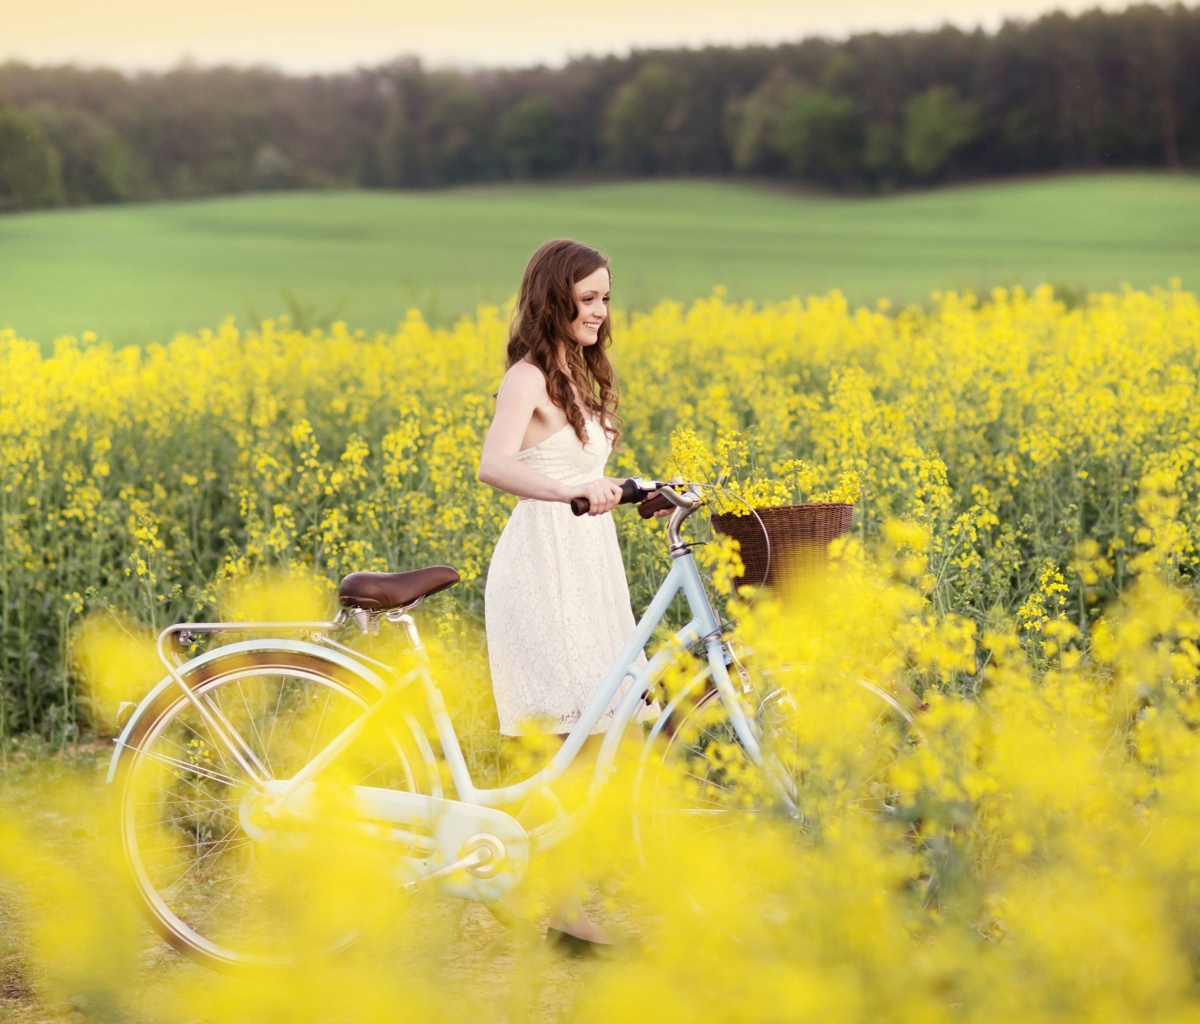 Das Girl With Bicycle In Yellow Field Wallpaper 1200x1024